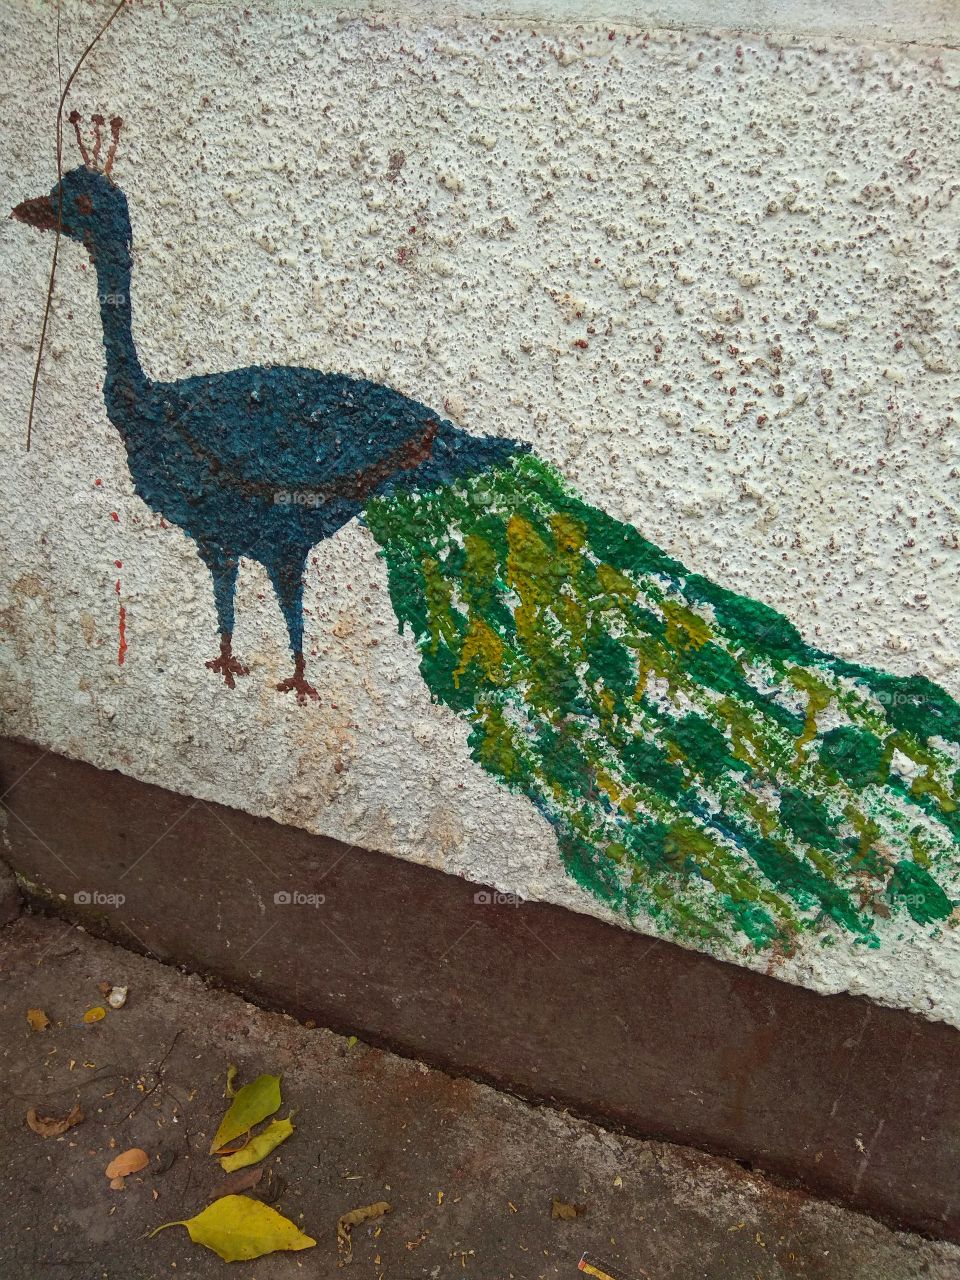 peacock on the wall